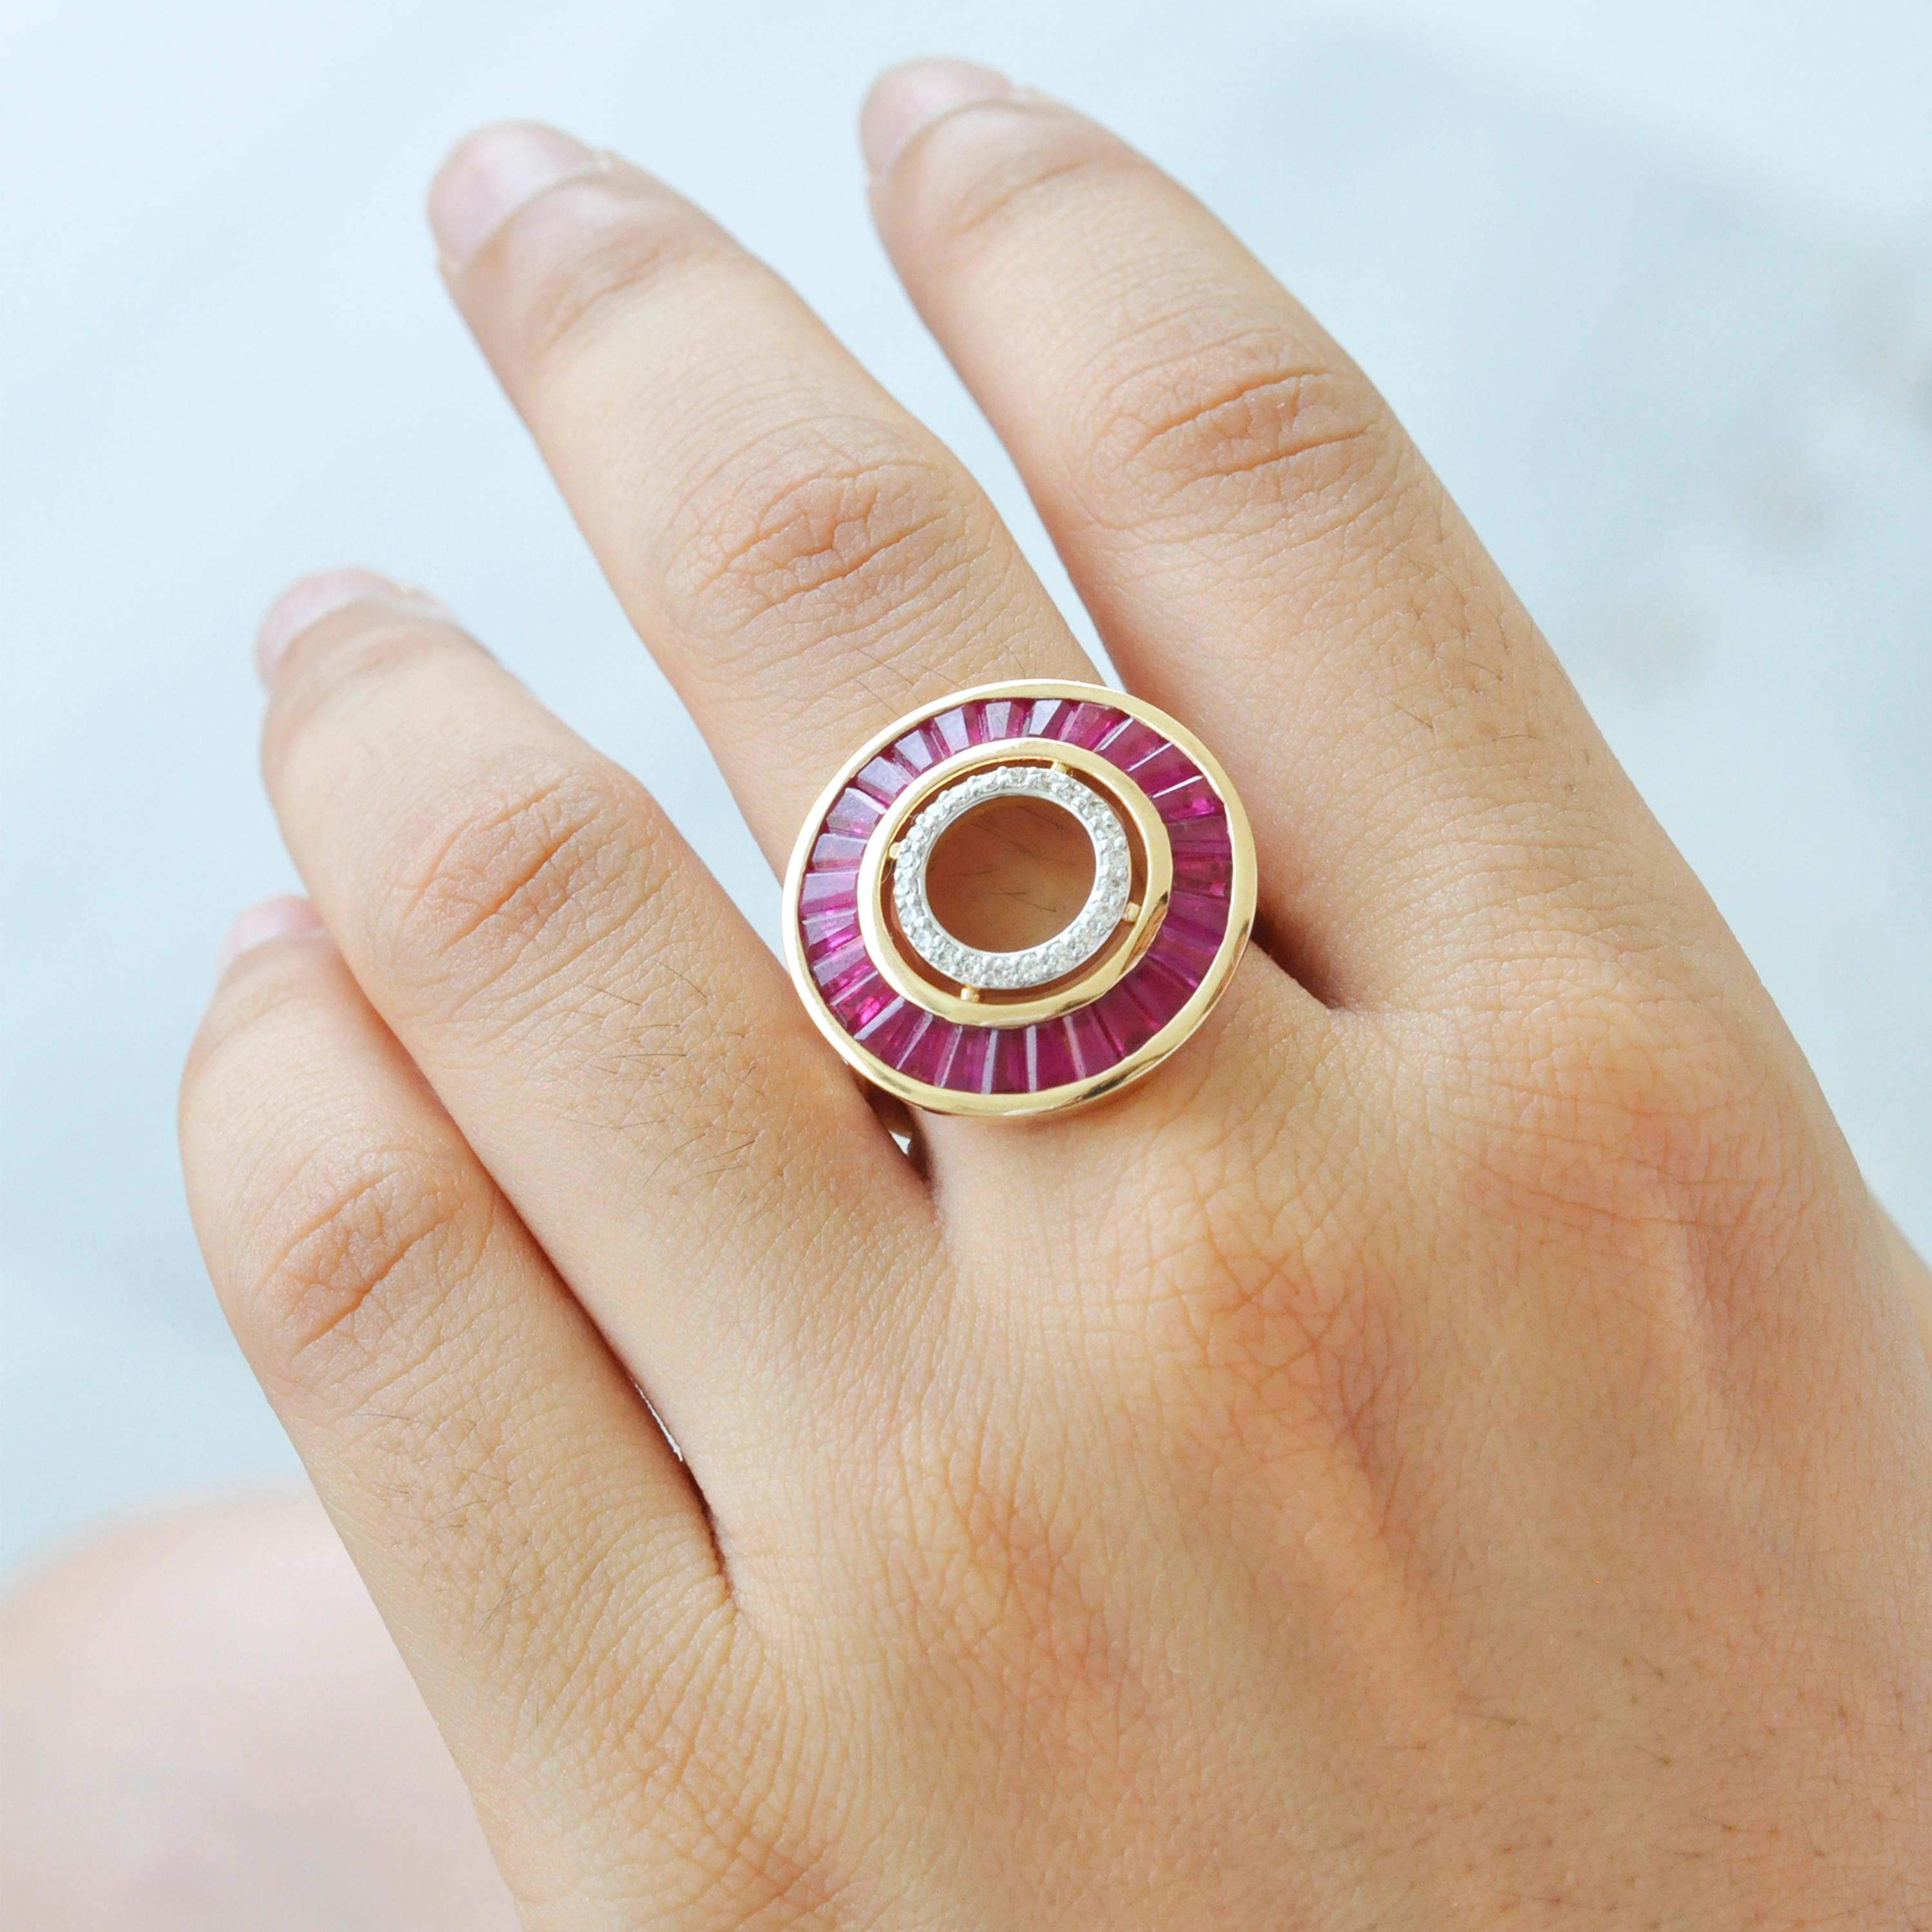 18 karat gold custom cut burma ruby baguette diamond art deco circular ring.

Art Deco Style, color and culture all come together to inspire this beautiful 18 karat gold taper baguette cut ruby diamond circular ring, where sumptuous scarlet of